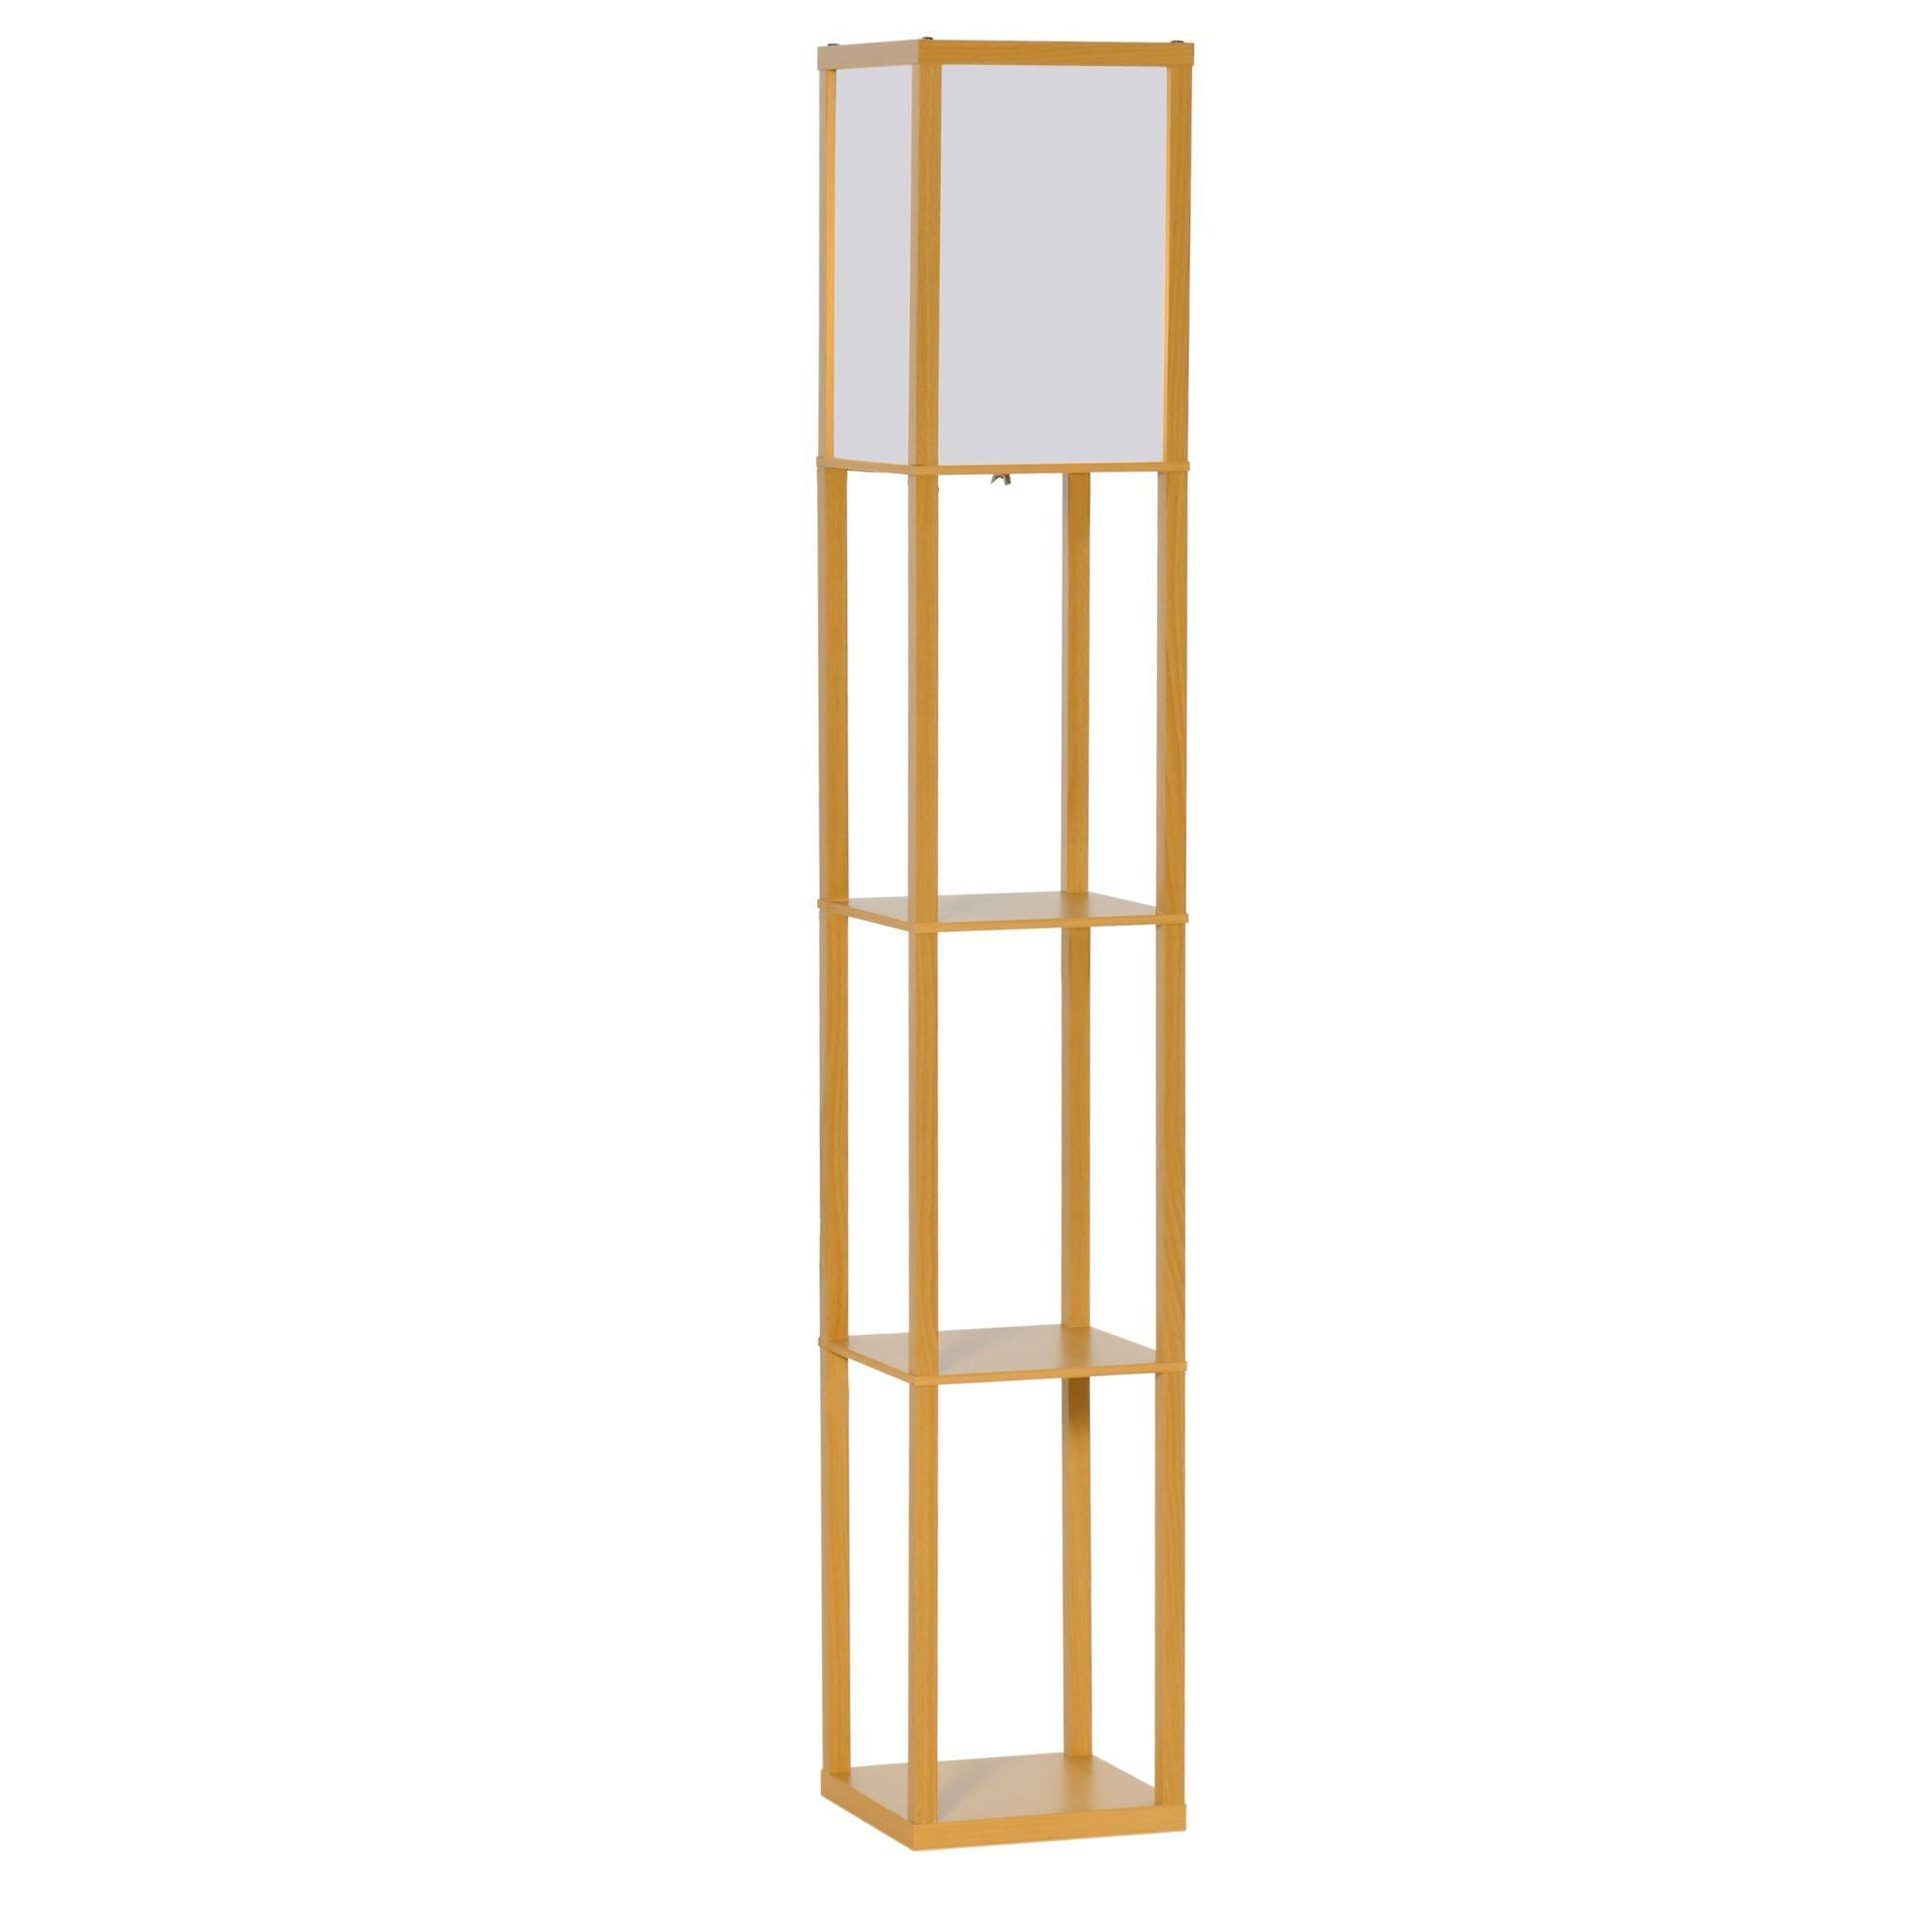 4 Tier Floor Lamp Standing Lamp with Storage Shelf for Home Office - image 1